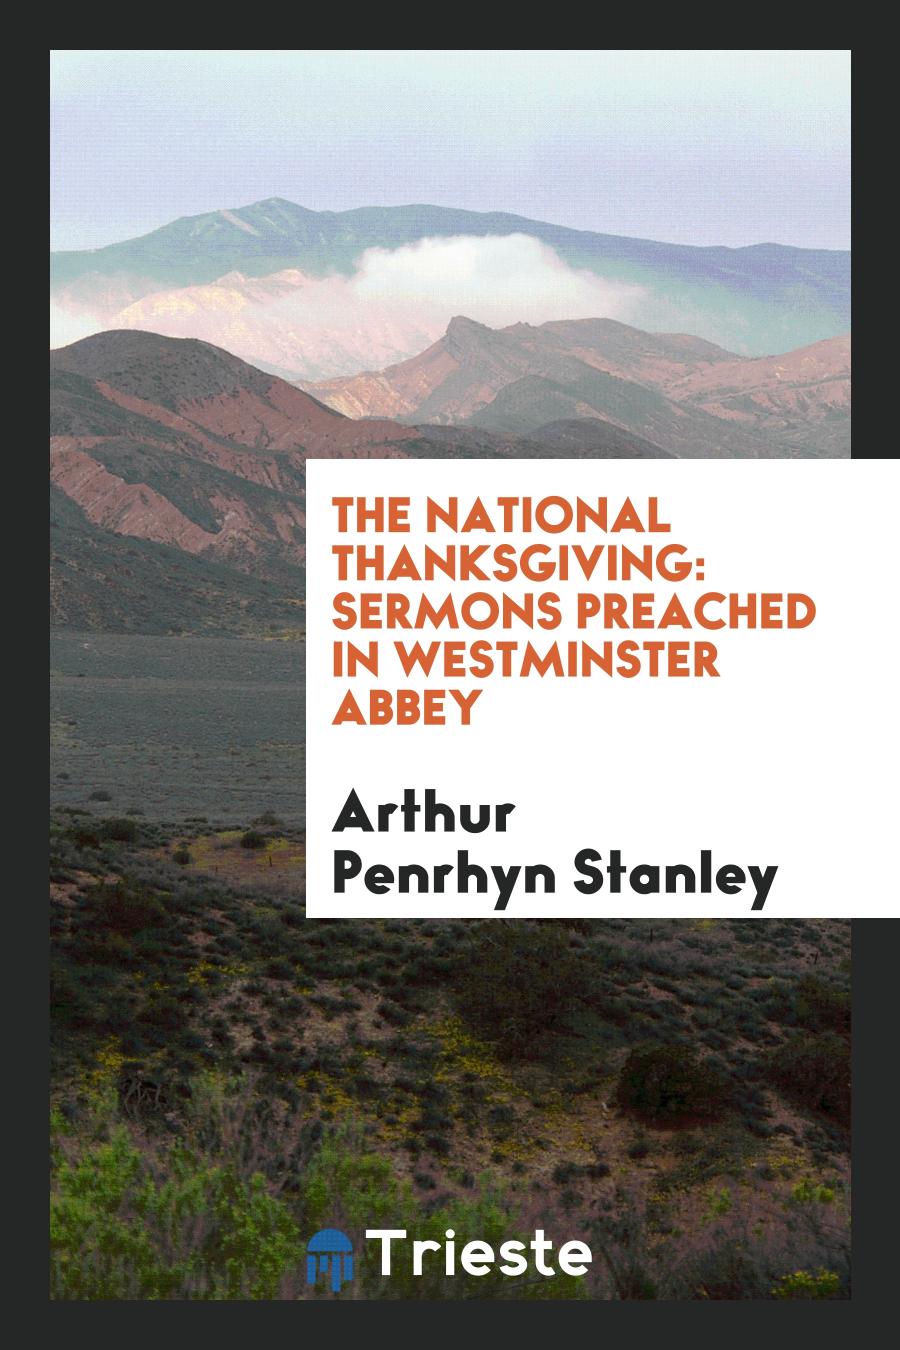 The National Thanksgiving: Sermons Preached in Westminster Abbey